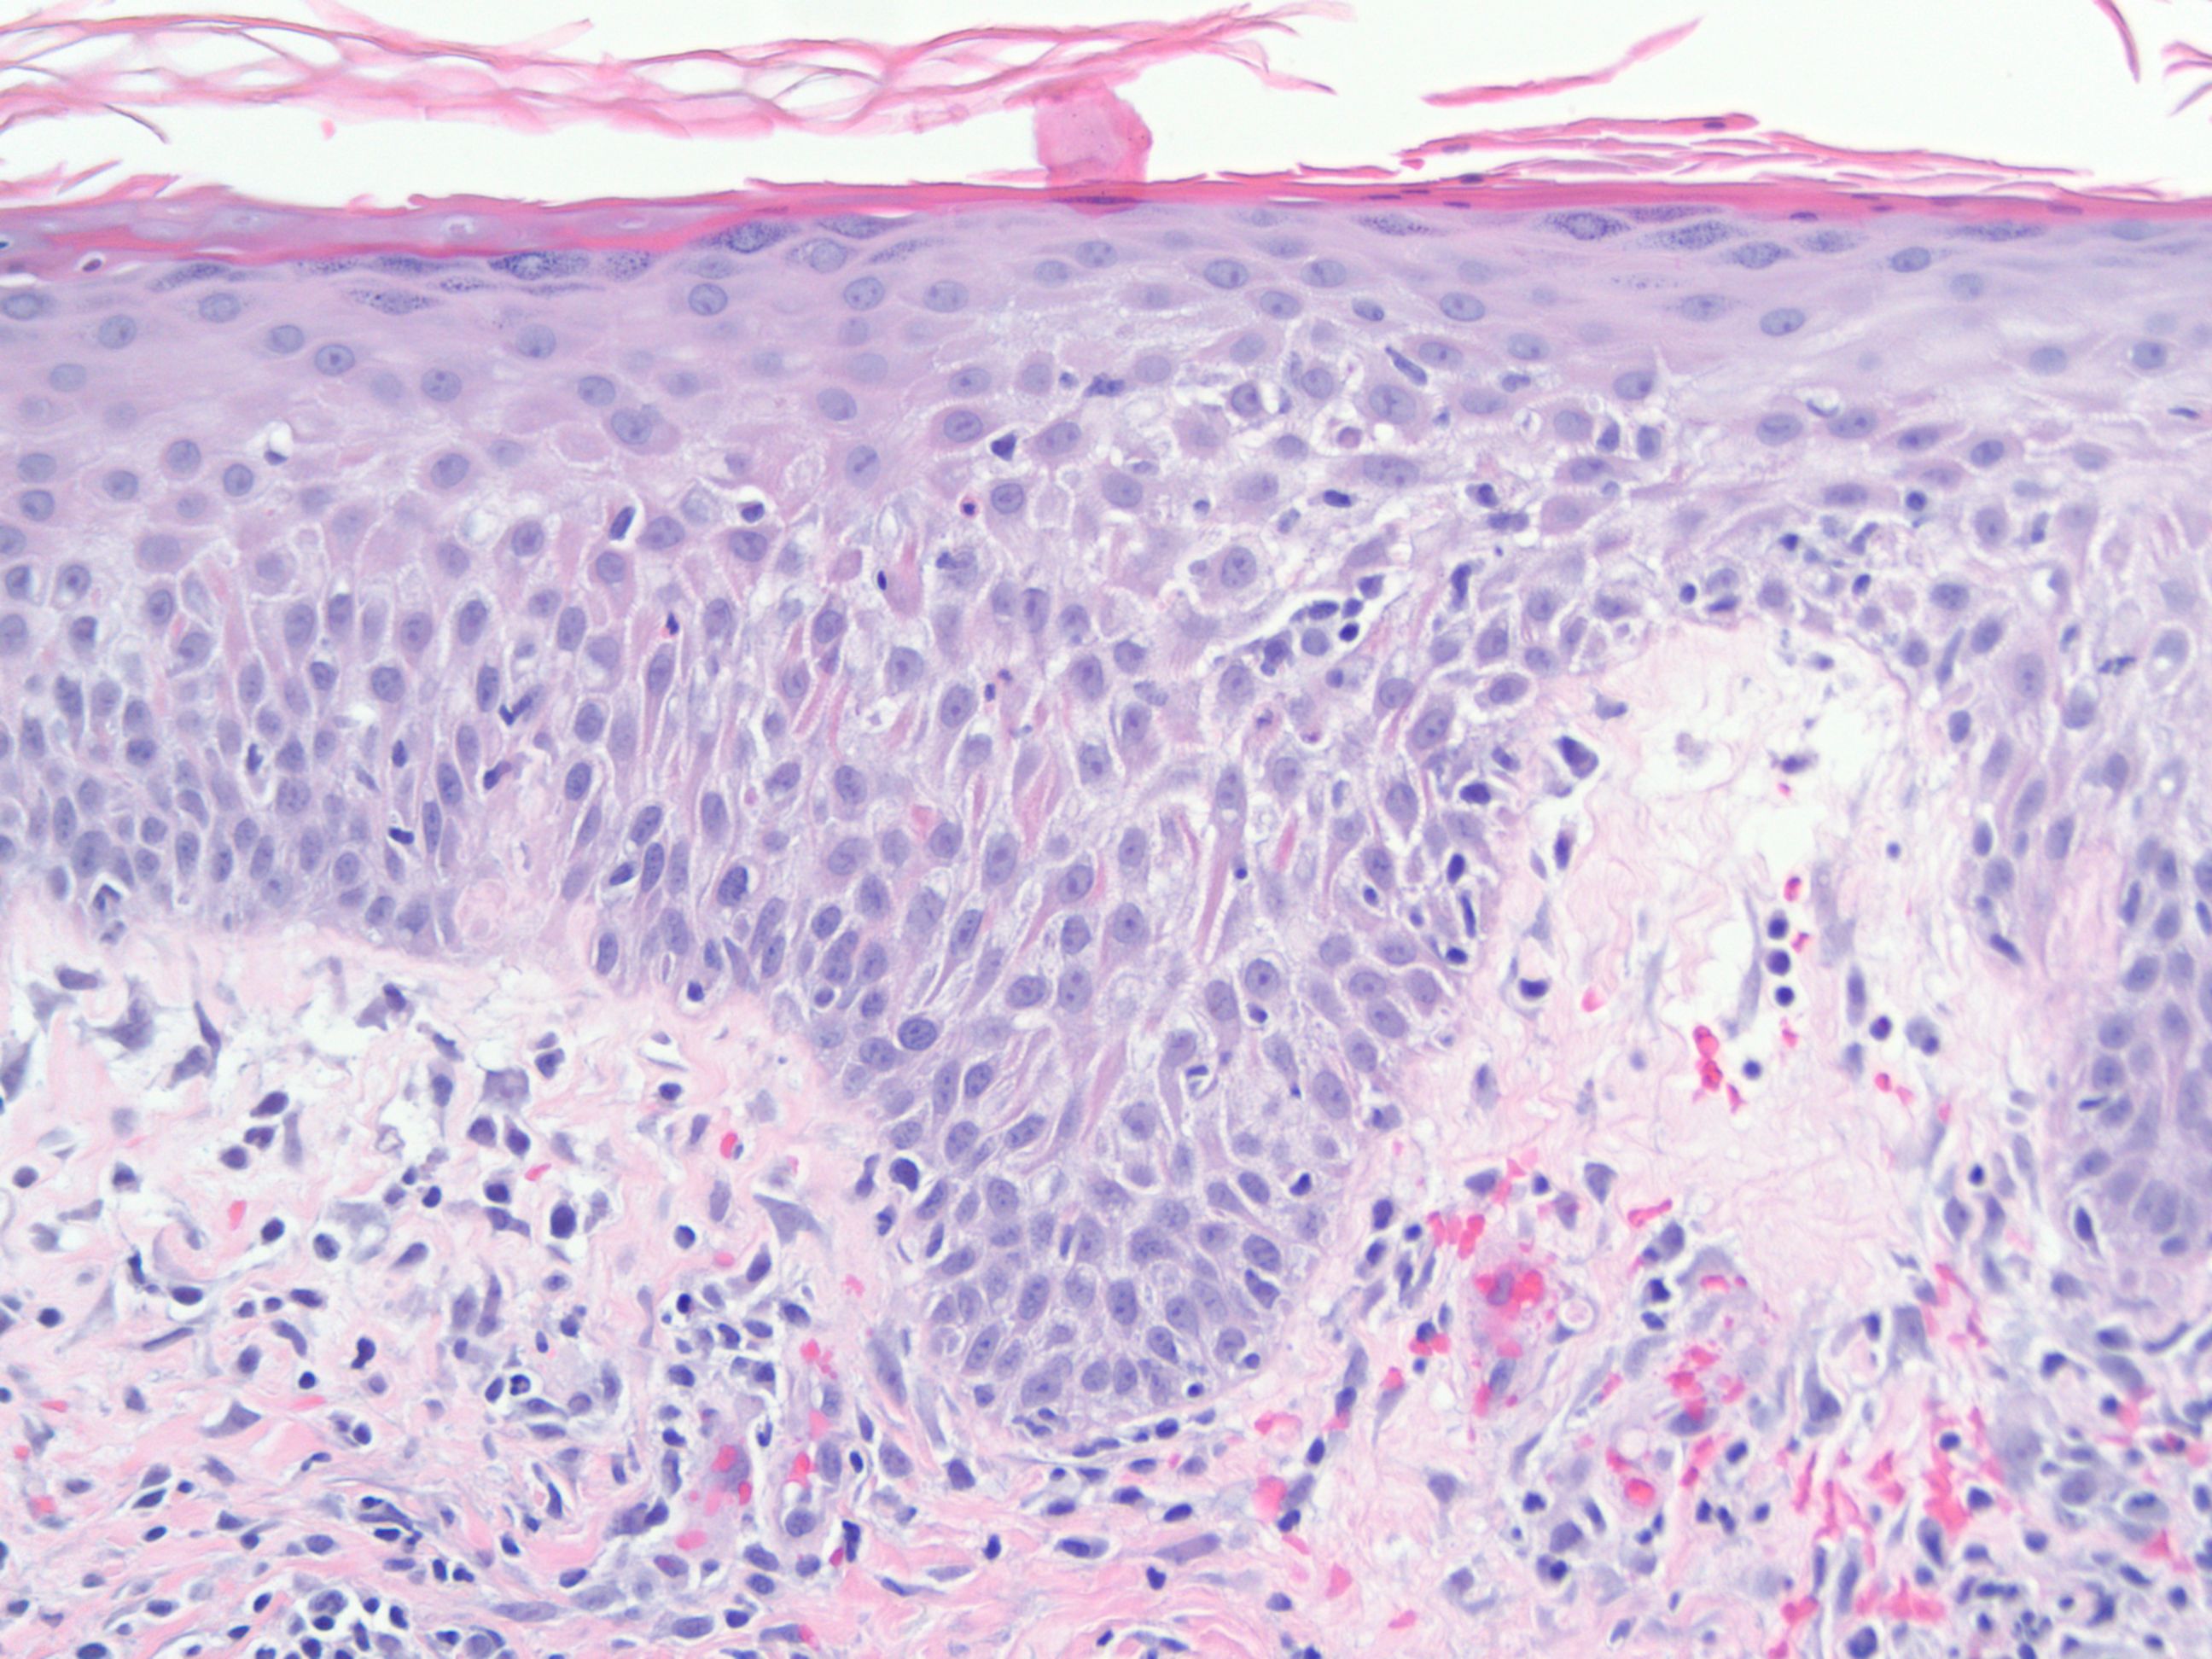 Acute dematitis showing papillary edema with neutrophil infiltration.